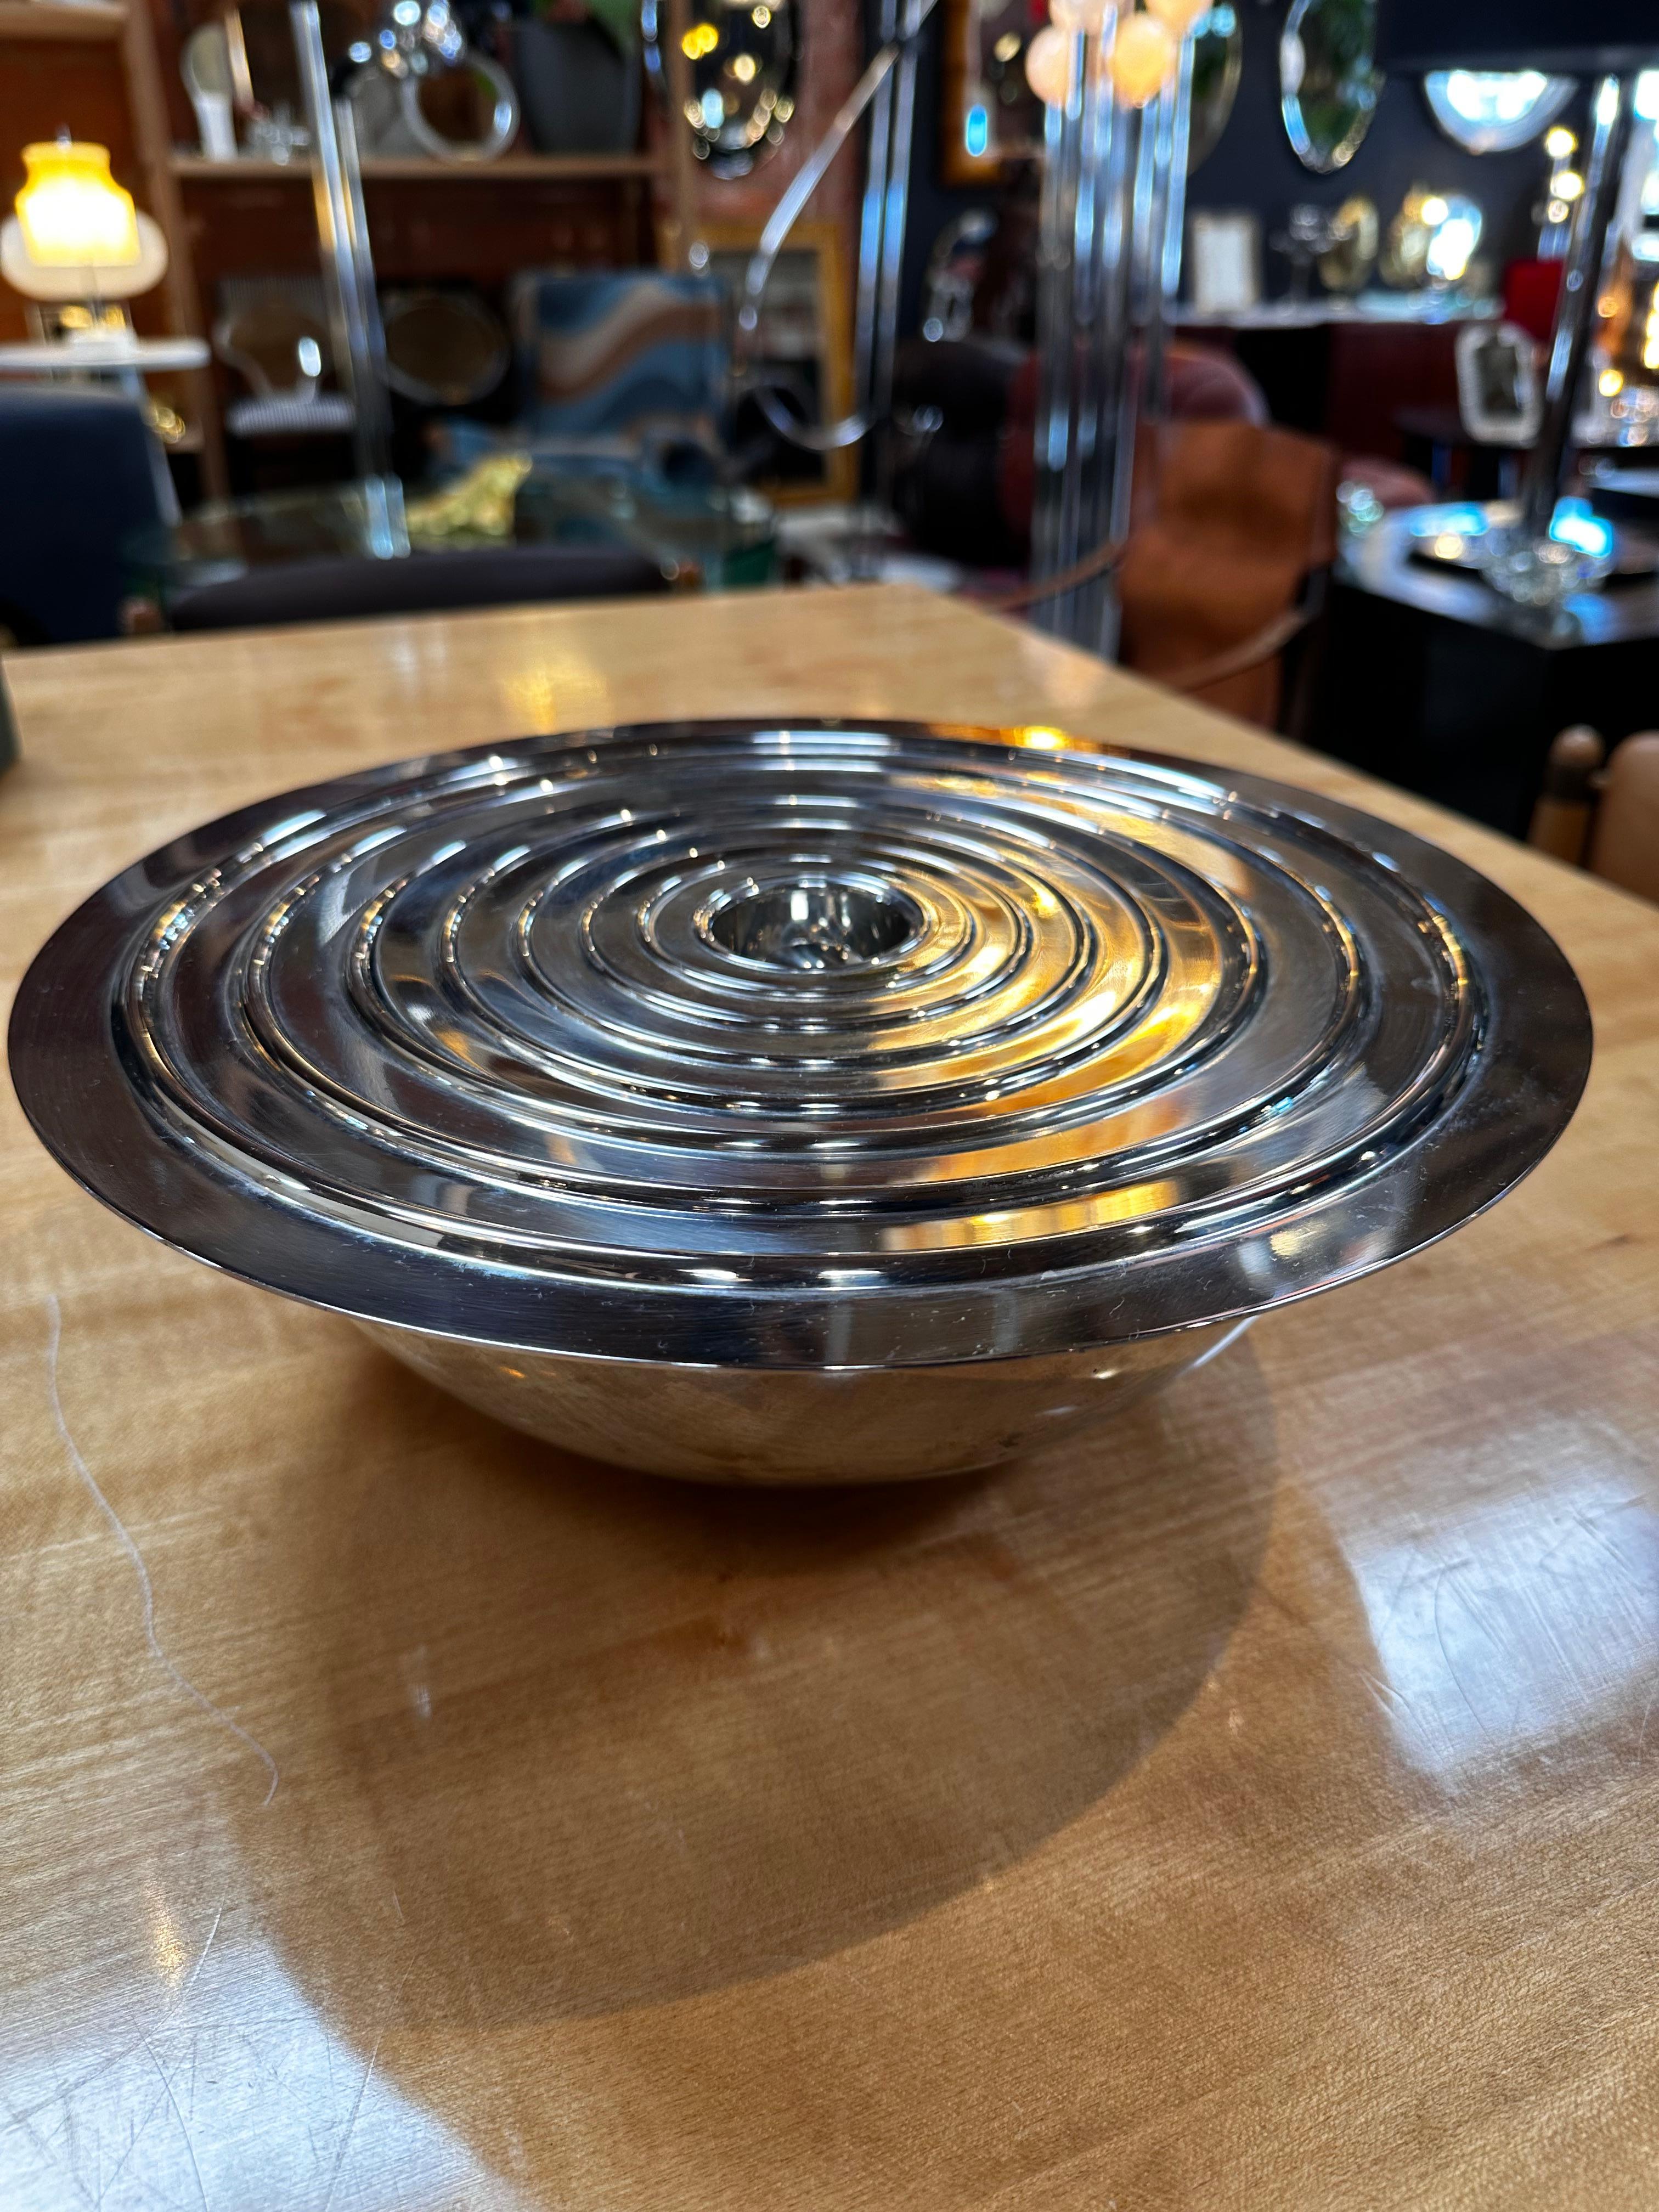 The Set of 8 Italian Silver Decorative Bowls from the 1980s is a versatile and visually appealing collection. Crafted with silver, these decorative bowls showcase a stylish design that allows them to nest inside one another. This practical feature